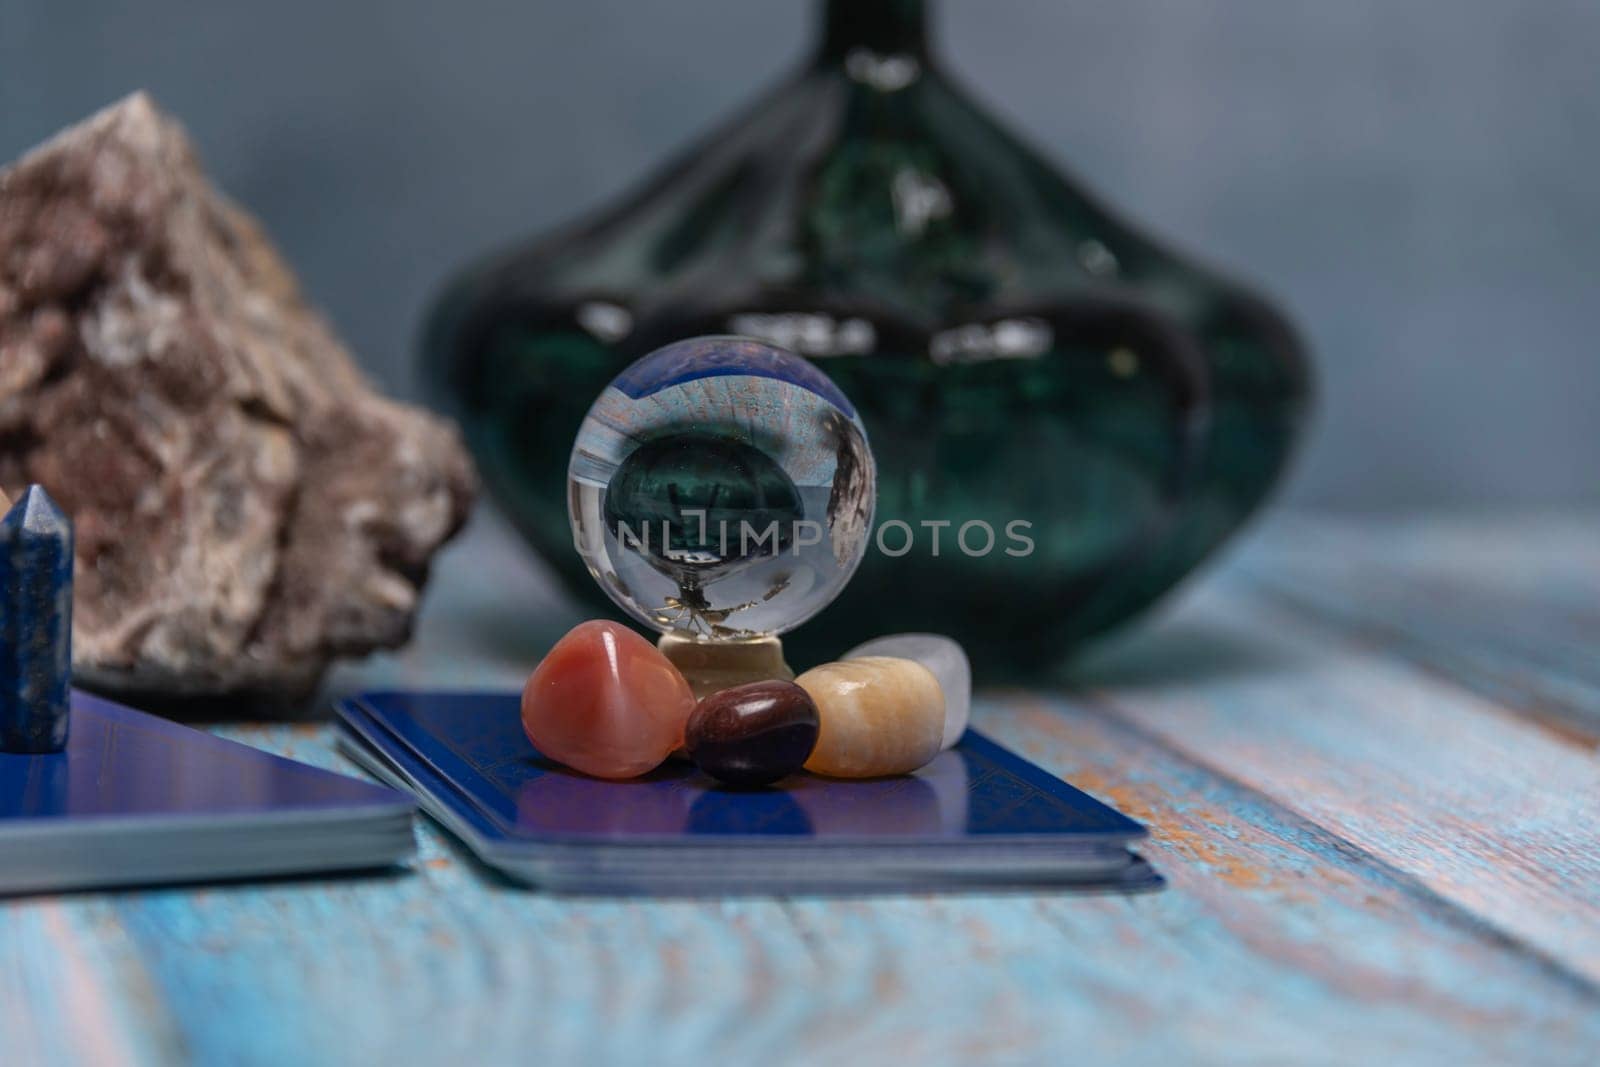 An intimate tarot reading session arrangement featuring vibrant crystals, tarot cards, and a geode on a rustic wooden table. by jbruiz78